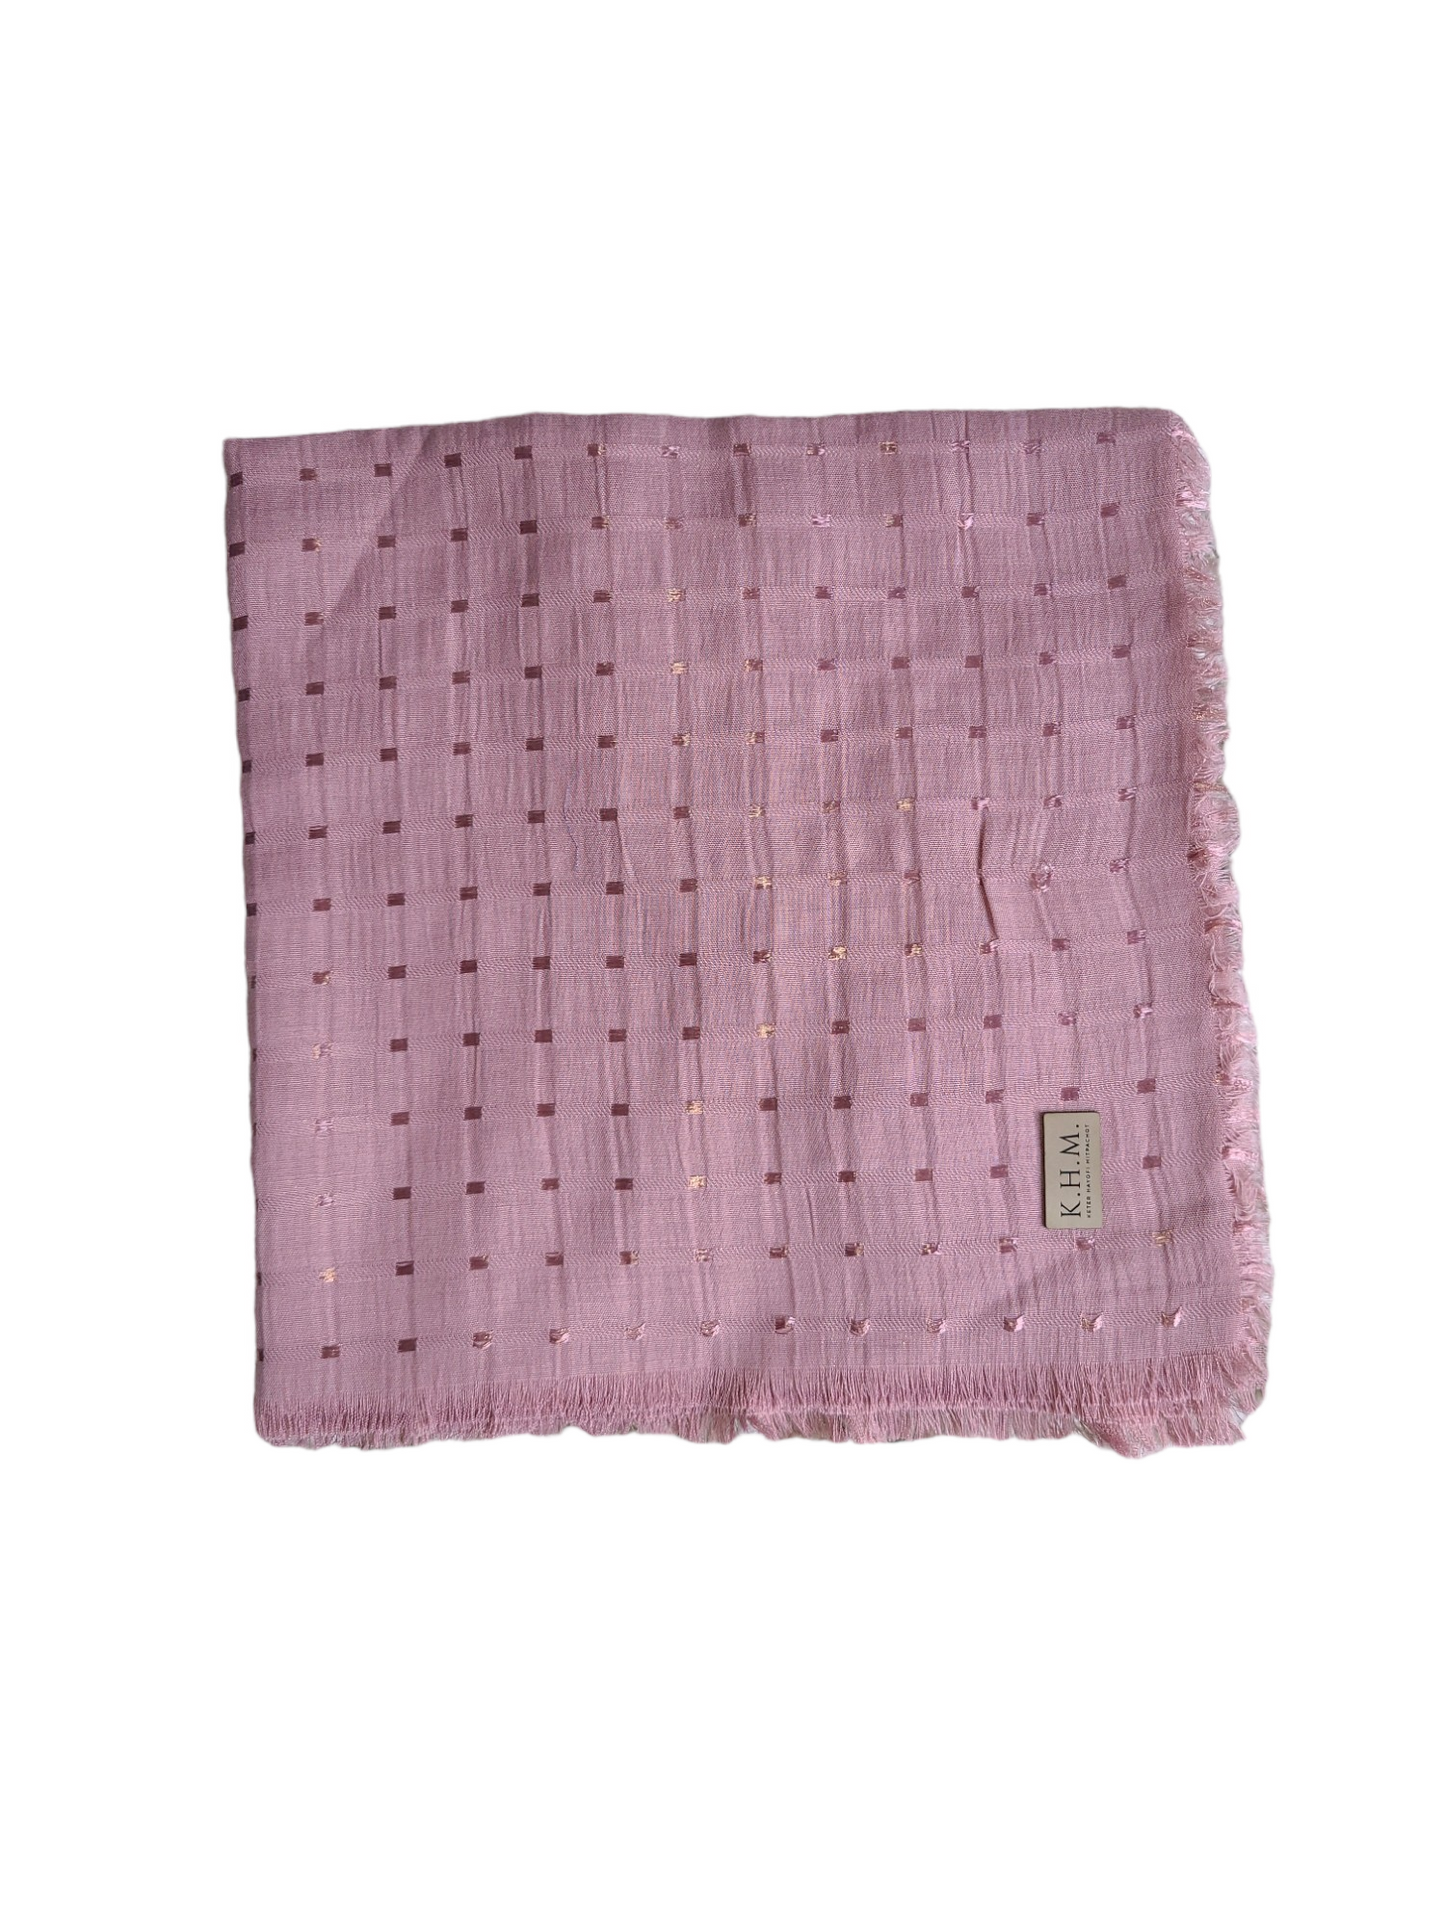 Solid Dotted Square Scarf - Keter Hayofi Mitpachot